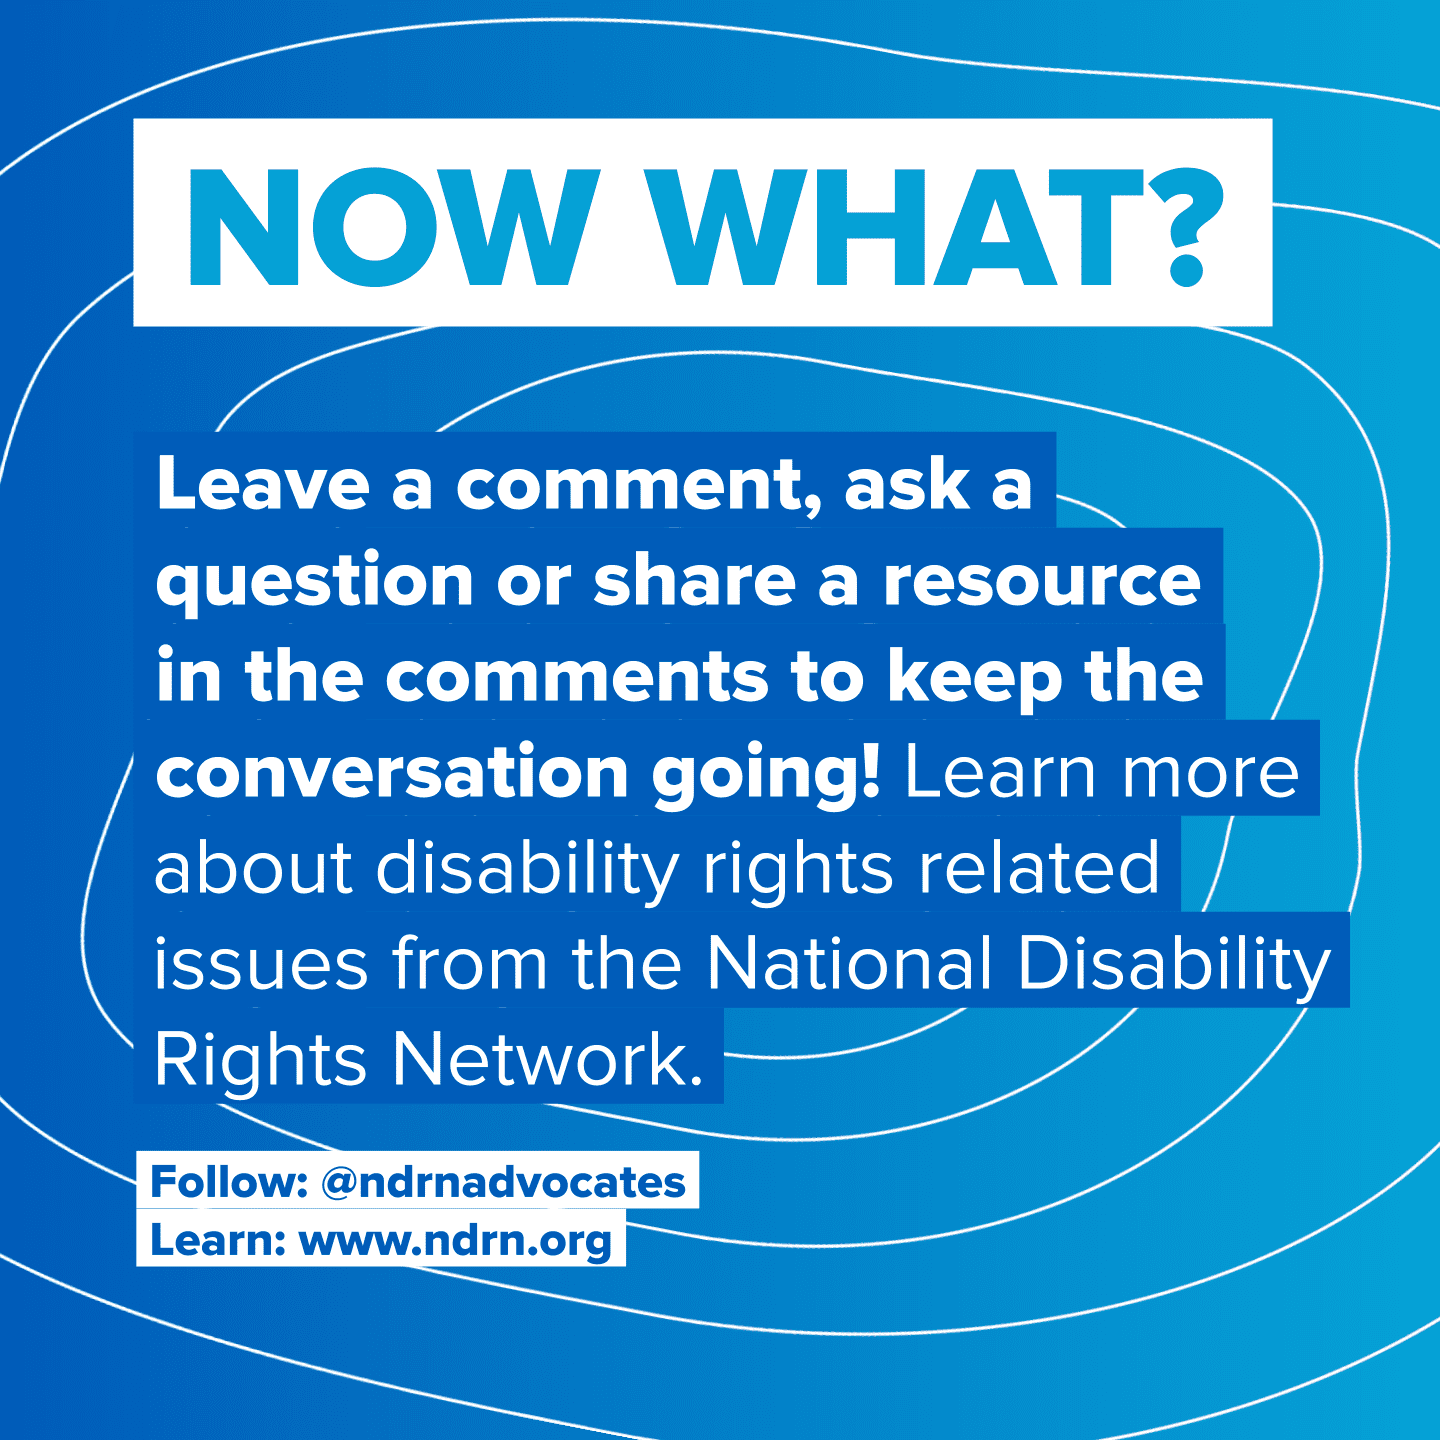 Title “Now What?” Leave a comment, ask a question or share a resource in the comments to keep the conversation going! Learn more about disability rights related issues from the National Disability Rights Network. Follow: @ndrnadvocates, Learn: www.ndrn.org